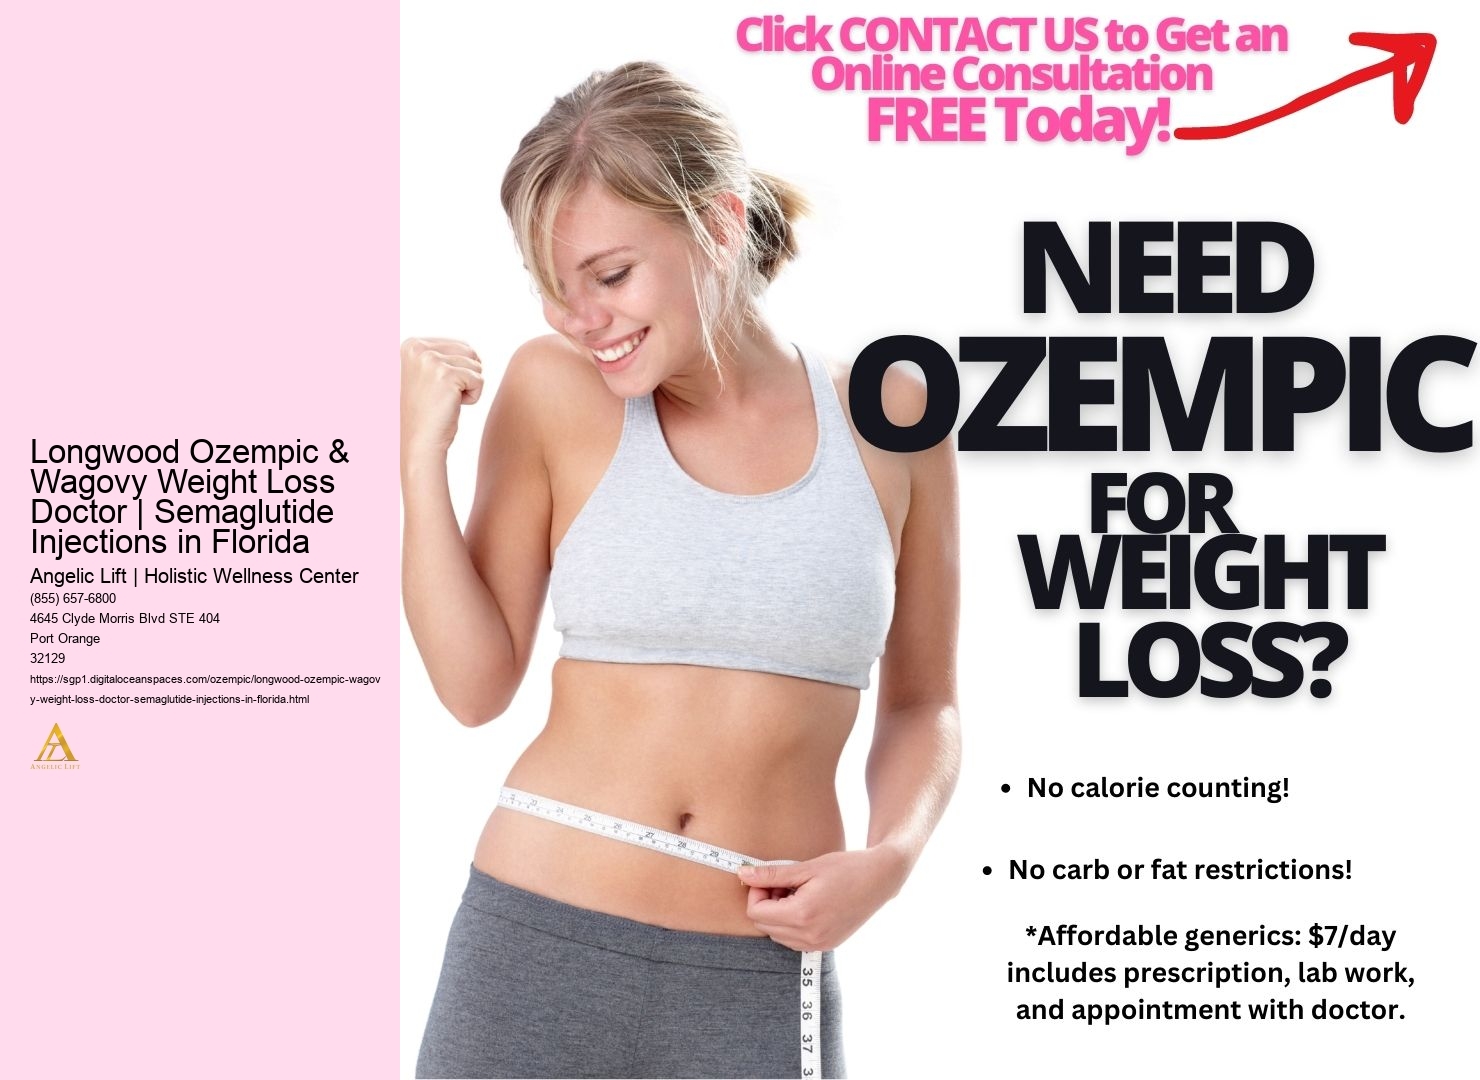 Longwood Ozempic & Wagovy Weight Loss Doctor | Semaglutide Injections in Florida